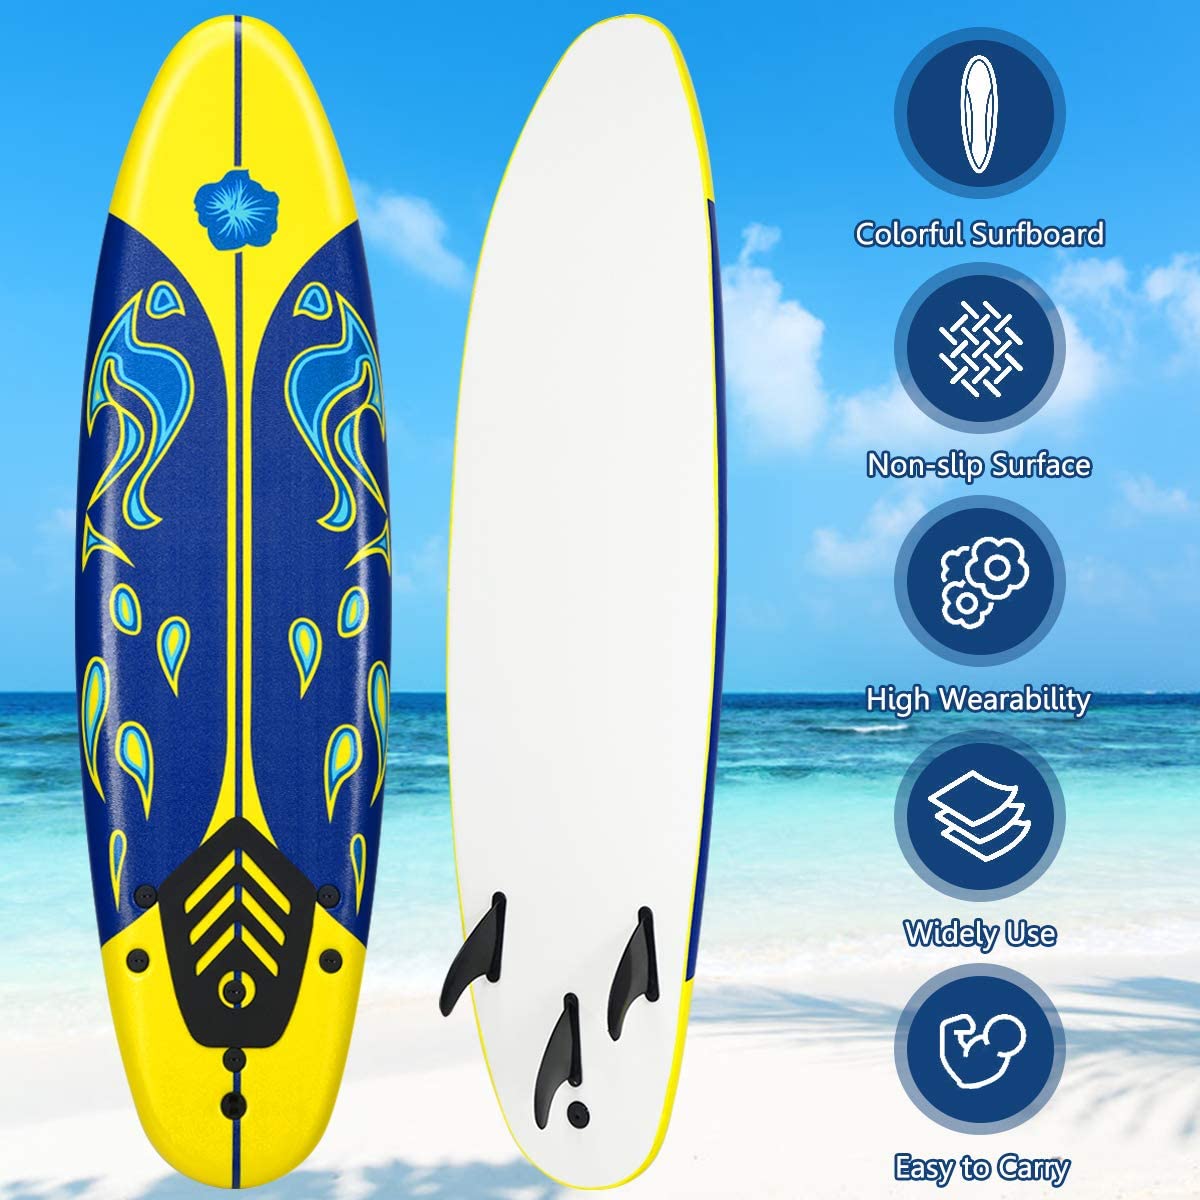 Giantex Surfboard, 6 Ft Stand Up Surfing Board w/ 3 Detachable Fins